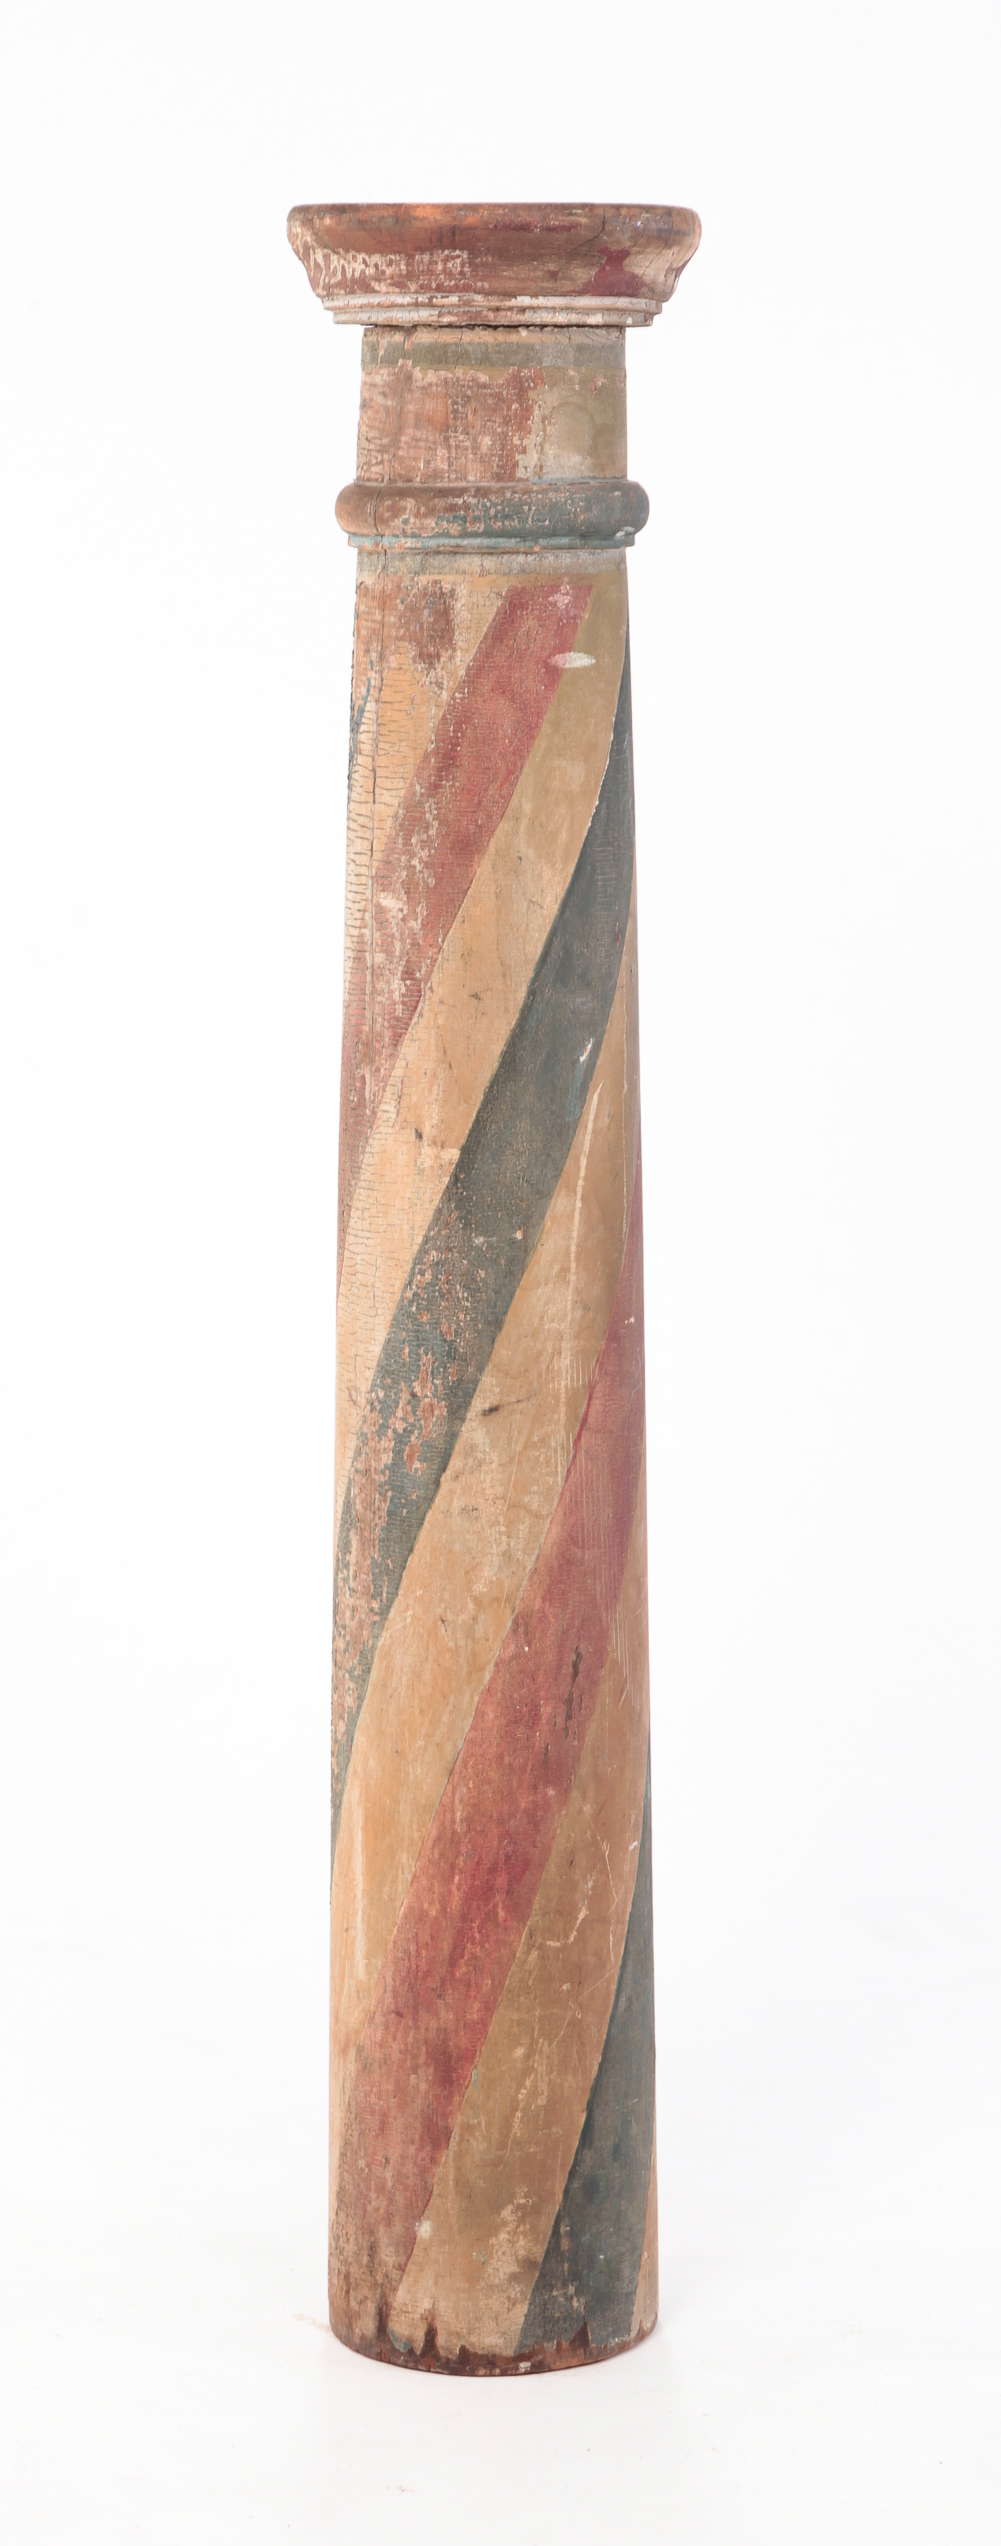 AMERICAN PAINTED BARBER POLE. Mid